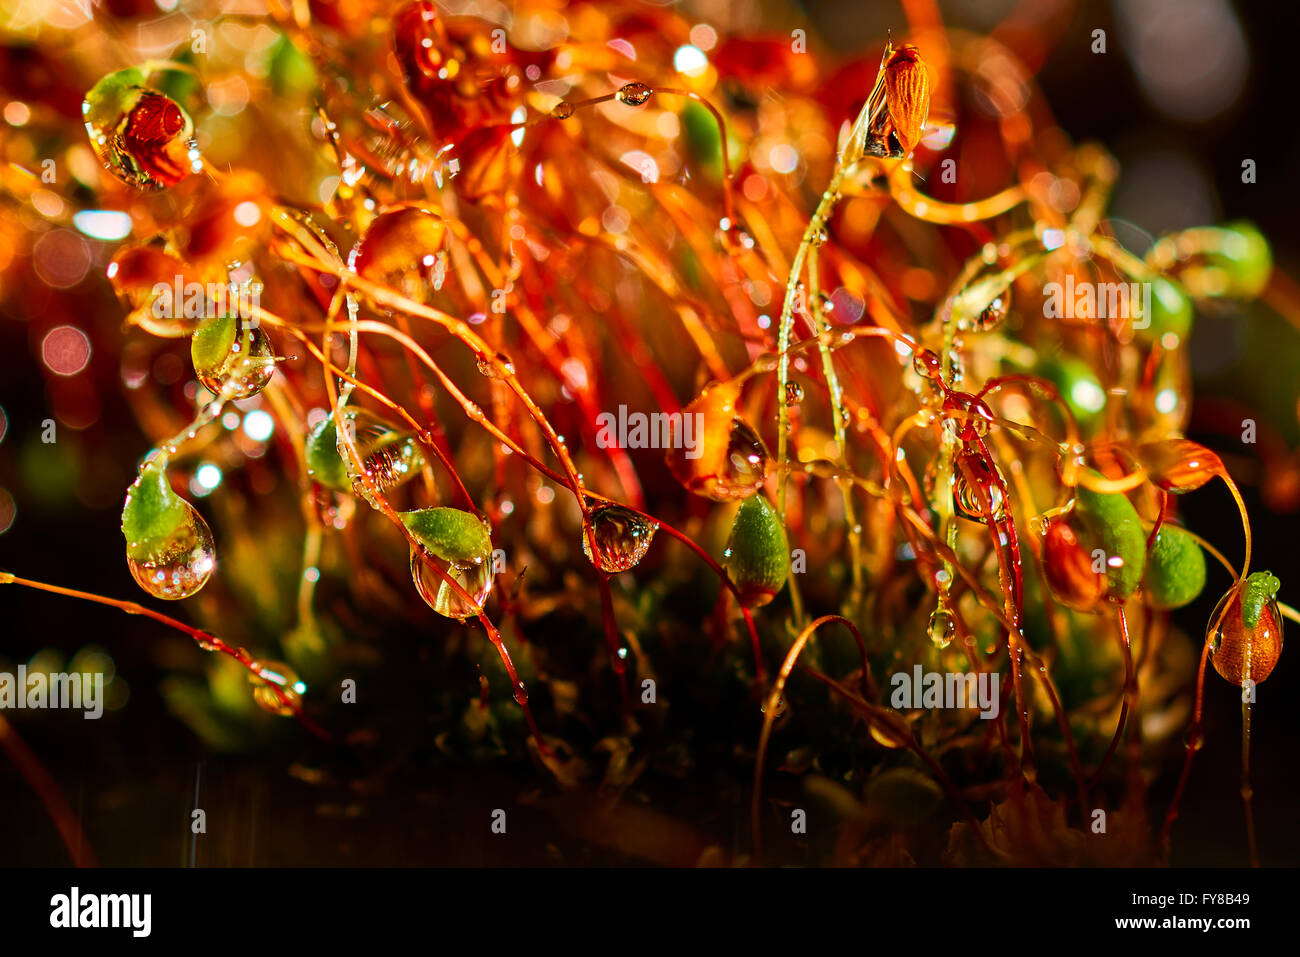 Drops of Water on the Grass at night Stock Photo